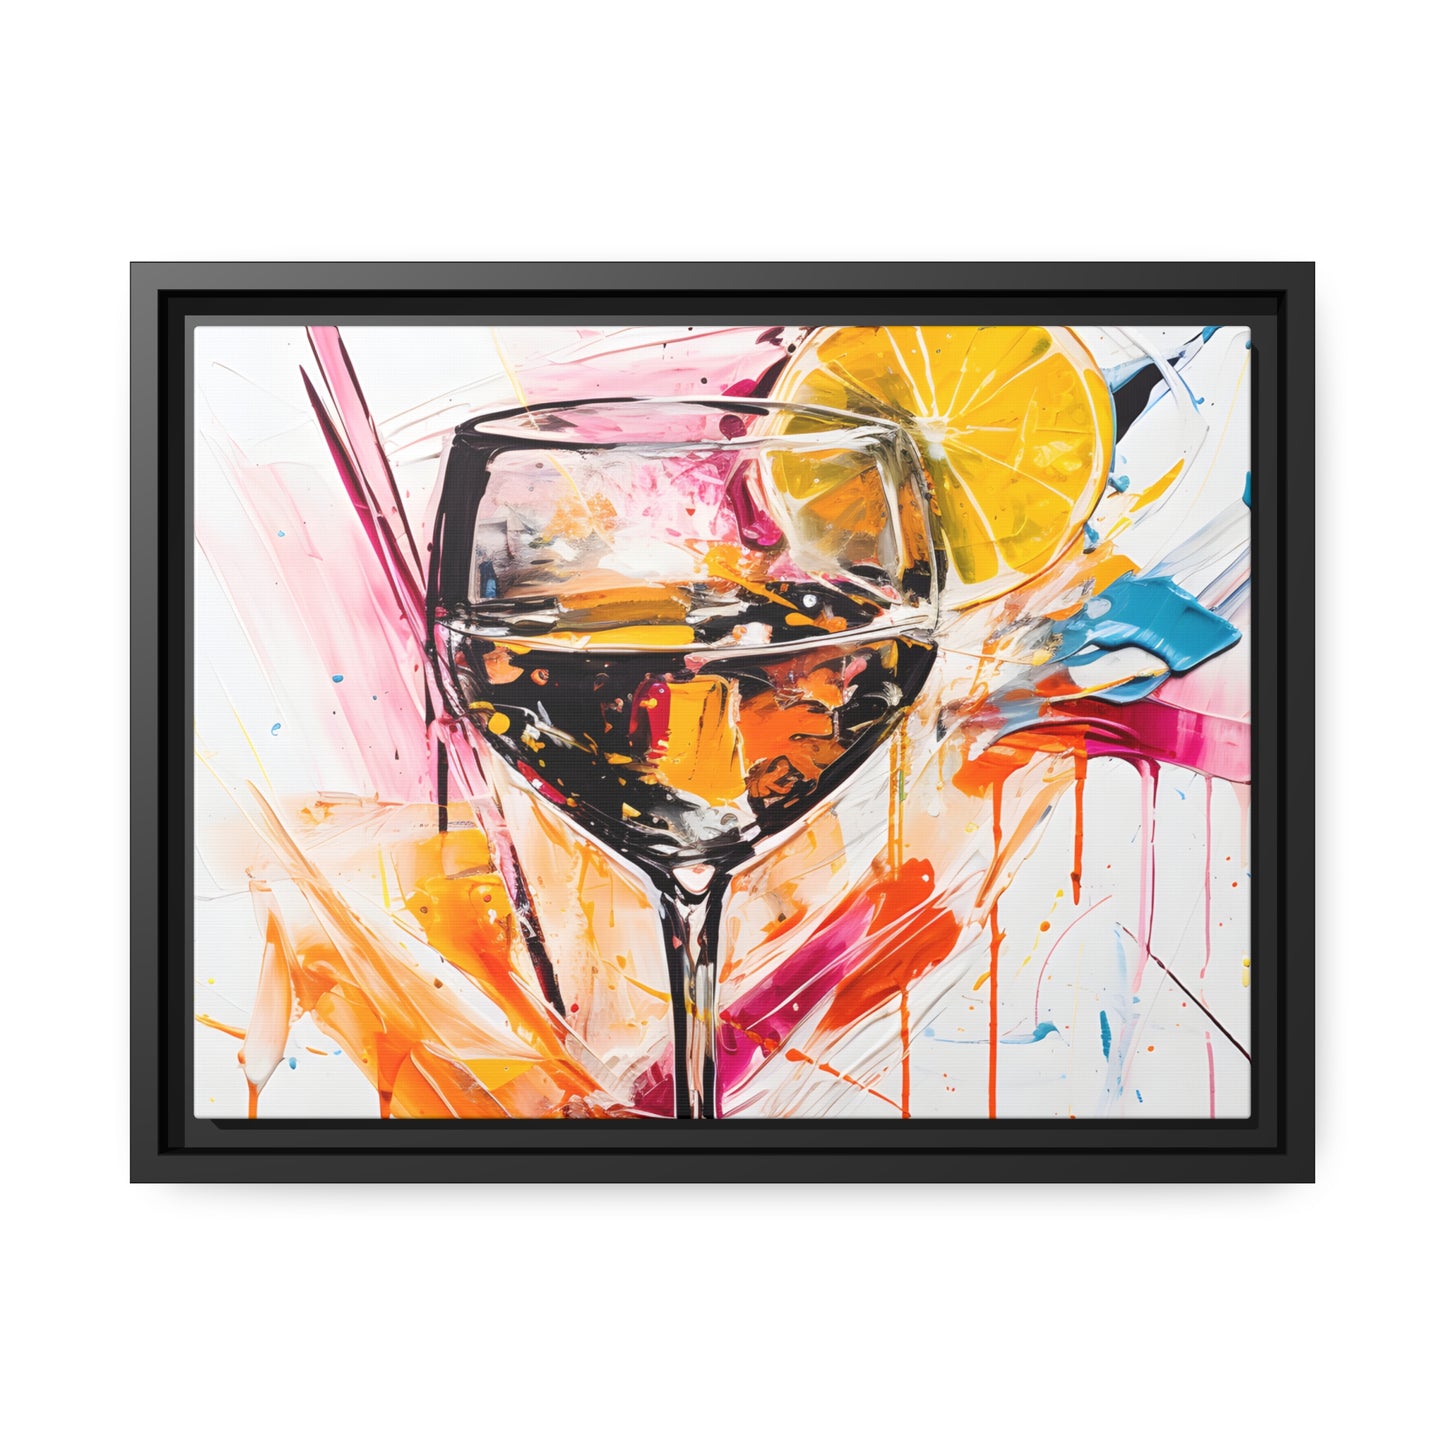 Framed Canvas artwork Bar/Night Life Art Bright Vibrant Neon Splashes Surrounding A Champagne Glass Full Of Alcohol And A Slice Of Lemon On White Background Framed Canvas Painting Alcohol Art Close Up 